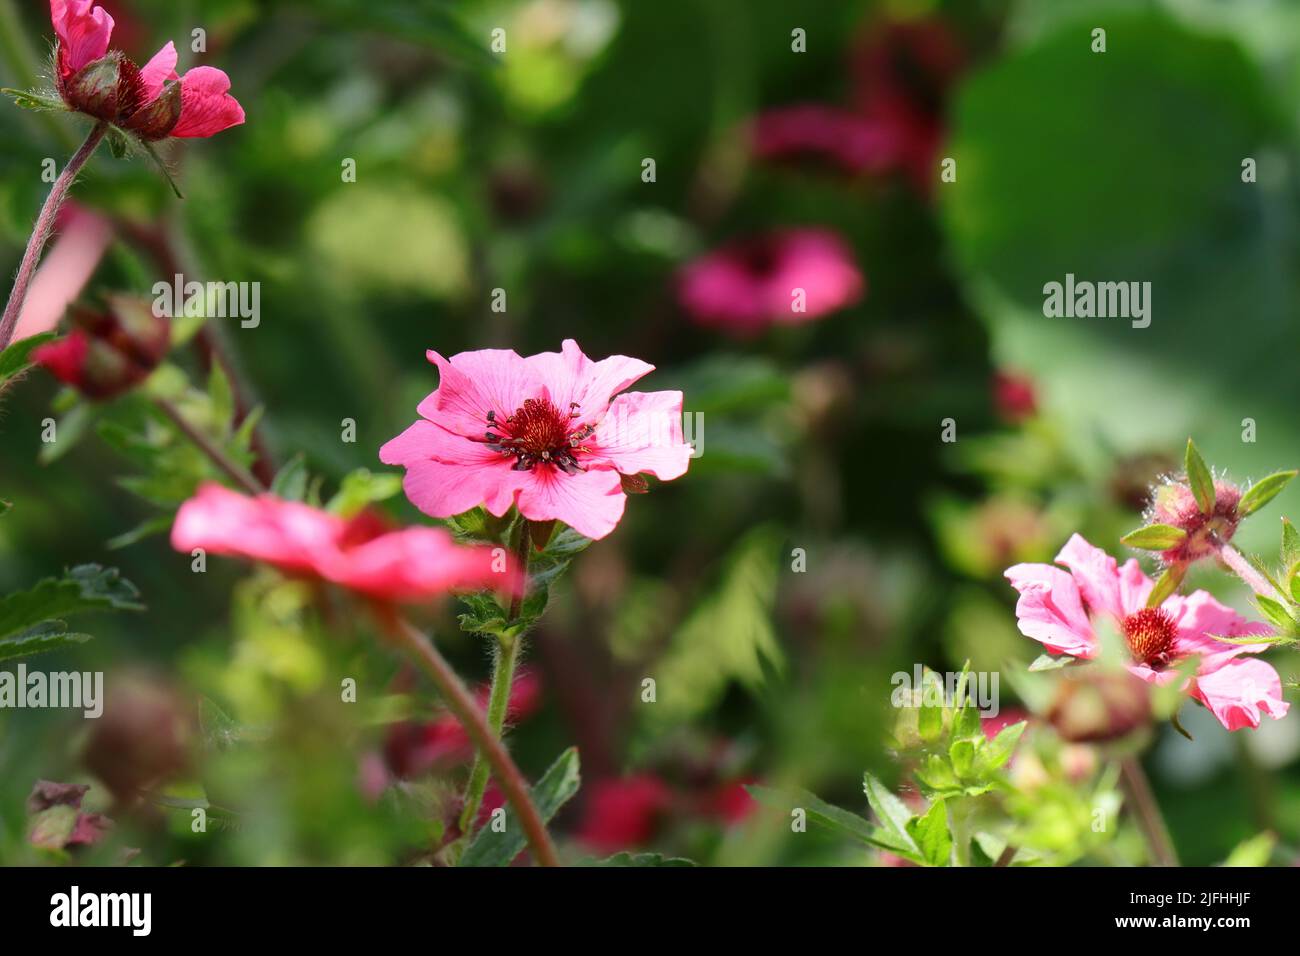 close-up of pretty pink potentilla flowers in a garden bed, selective focus, blurred background Stock Photo